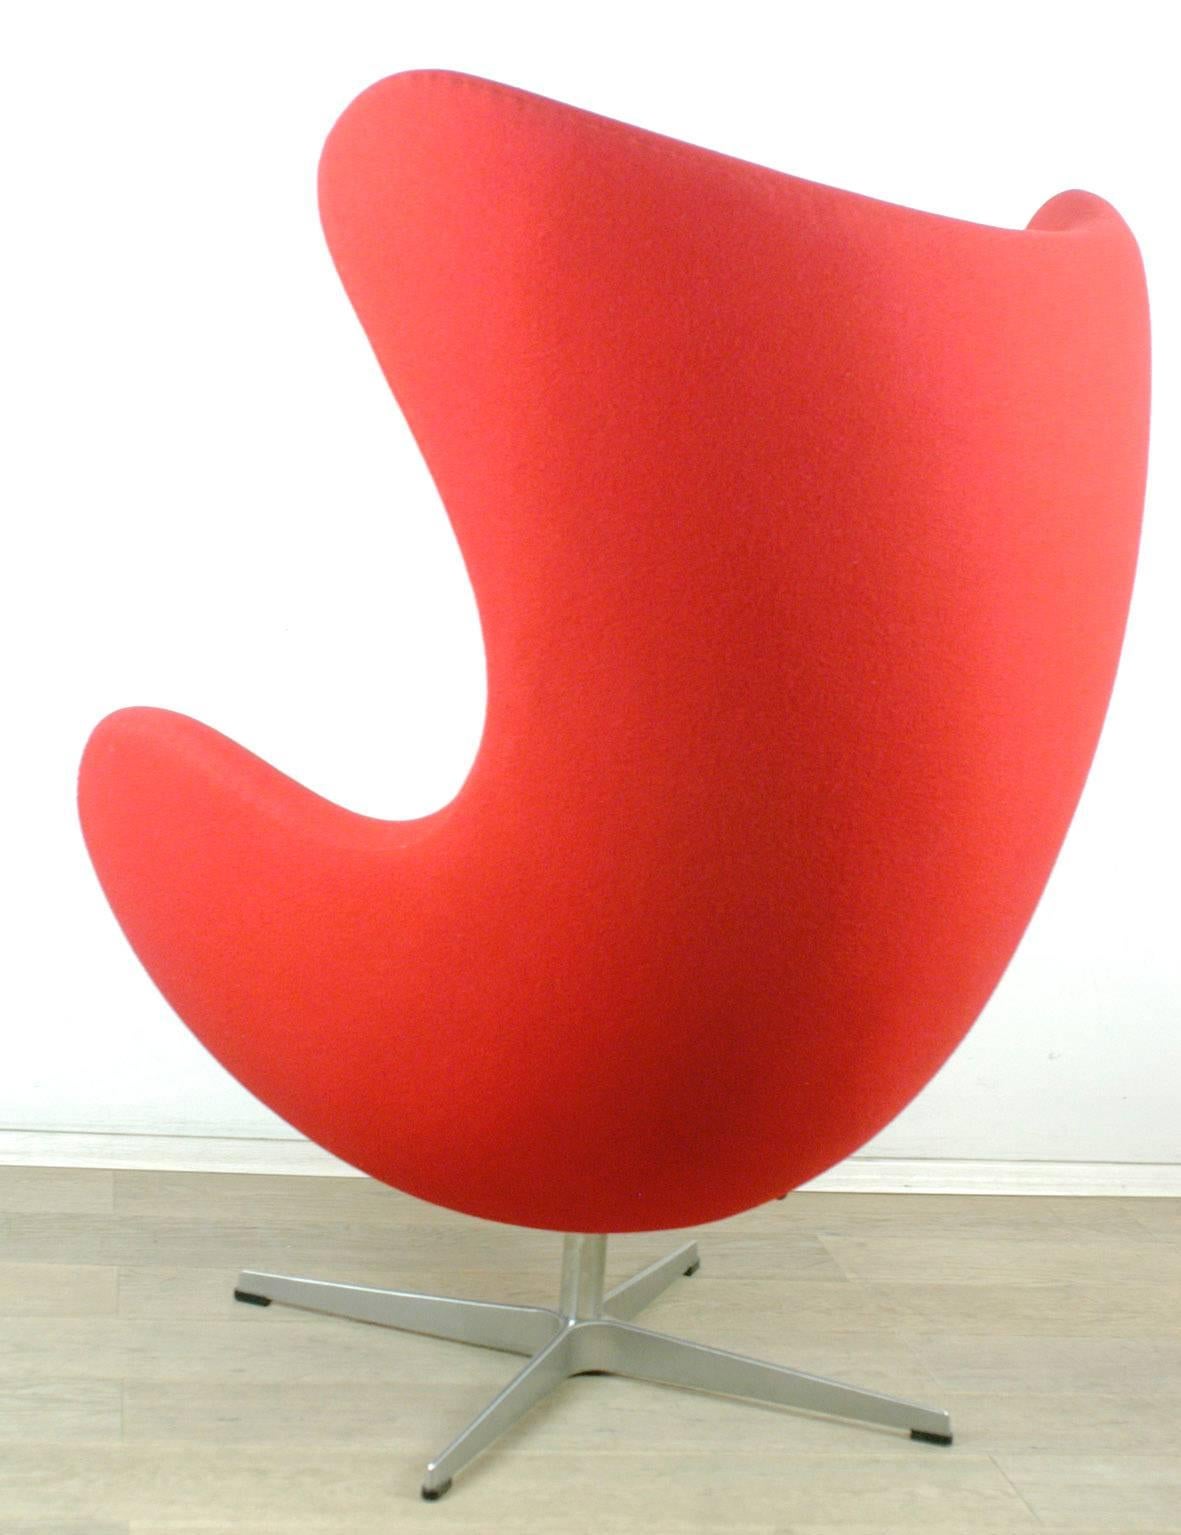 Iconic Jacobsens egg chair designed 1958 with original red wool fabric, four star base, swiveling and reclining function.